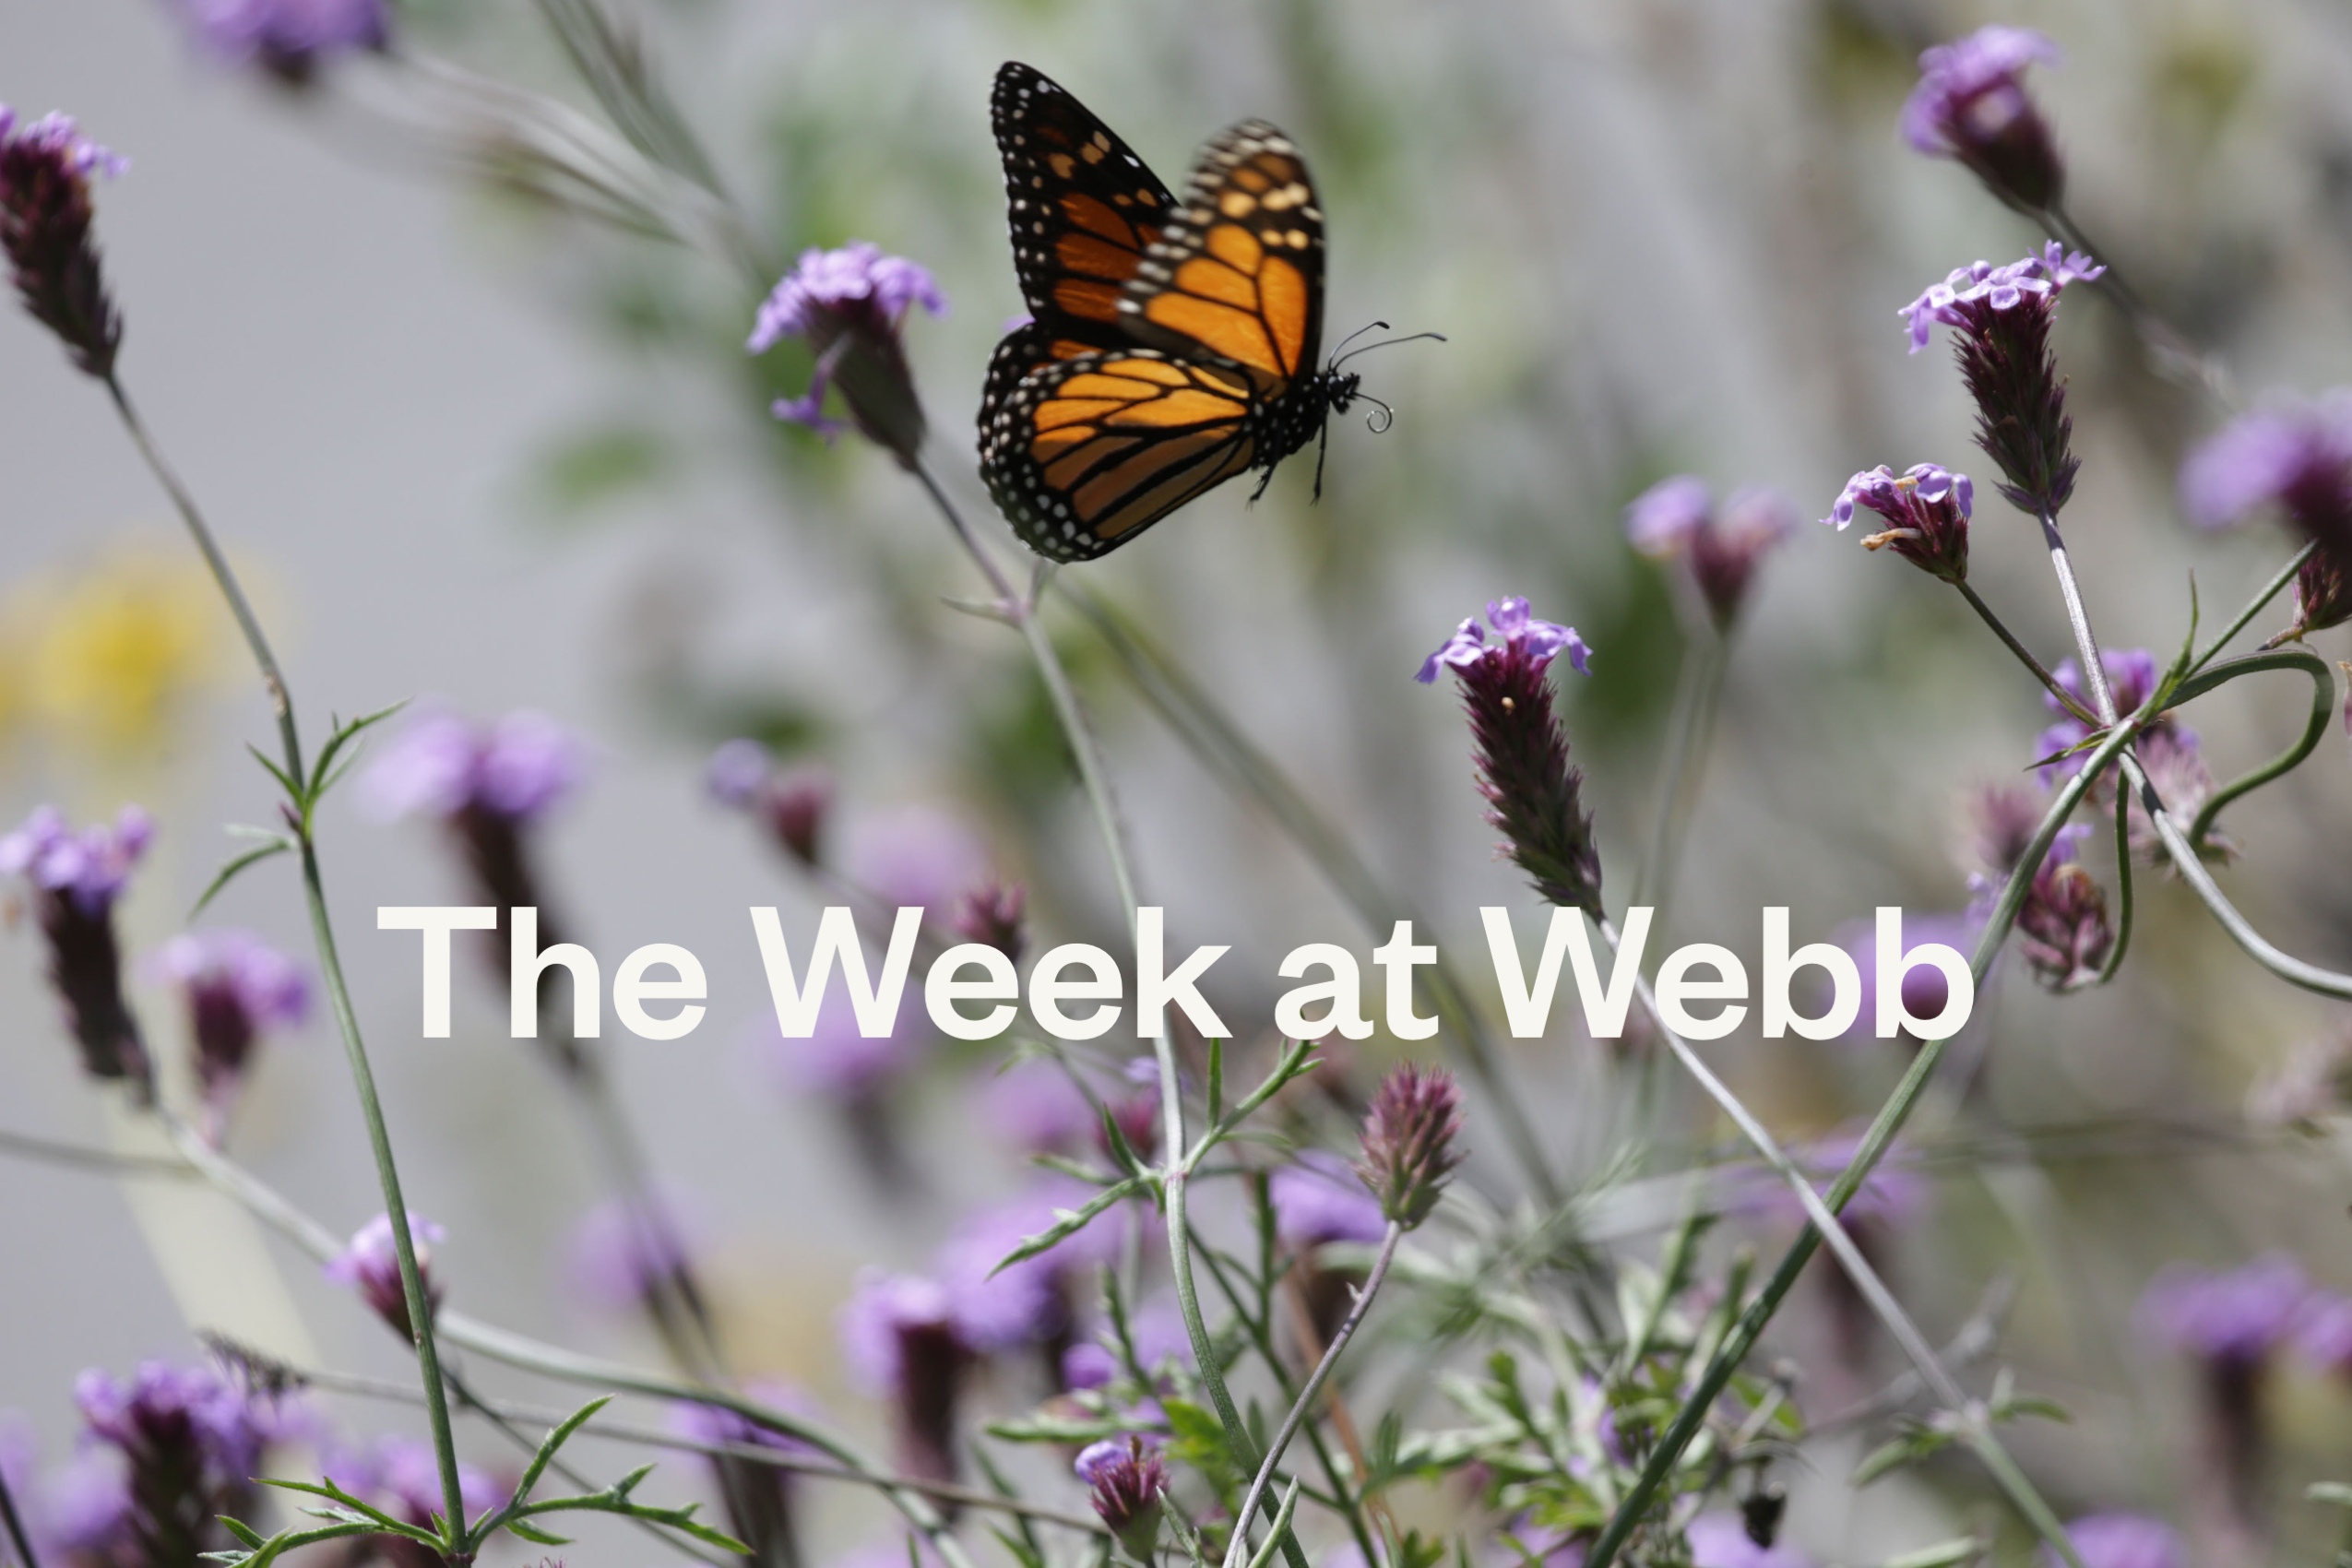 Title slide of The Week at Webb with a butterfly and De la Mina verbena flower blooms